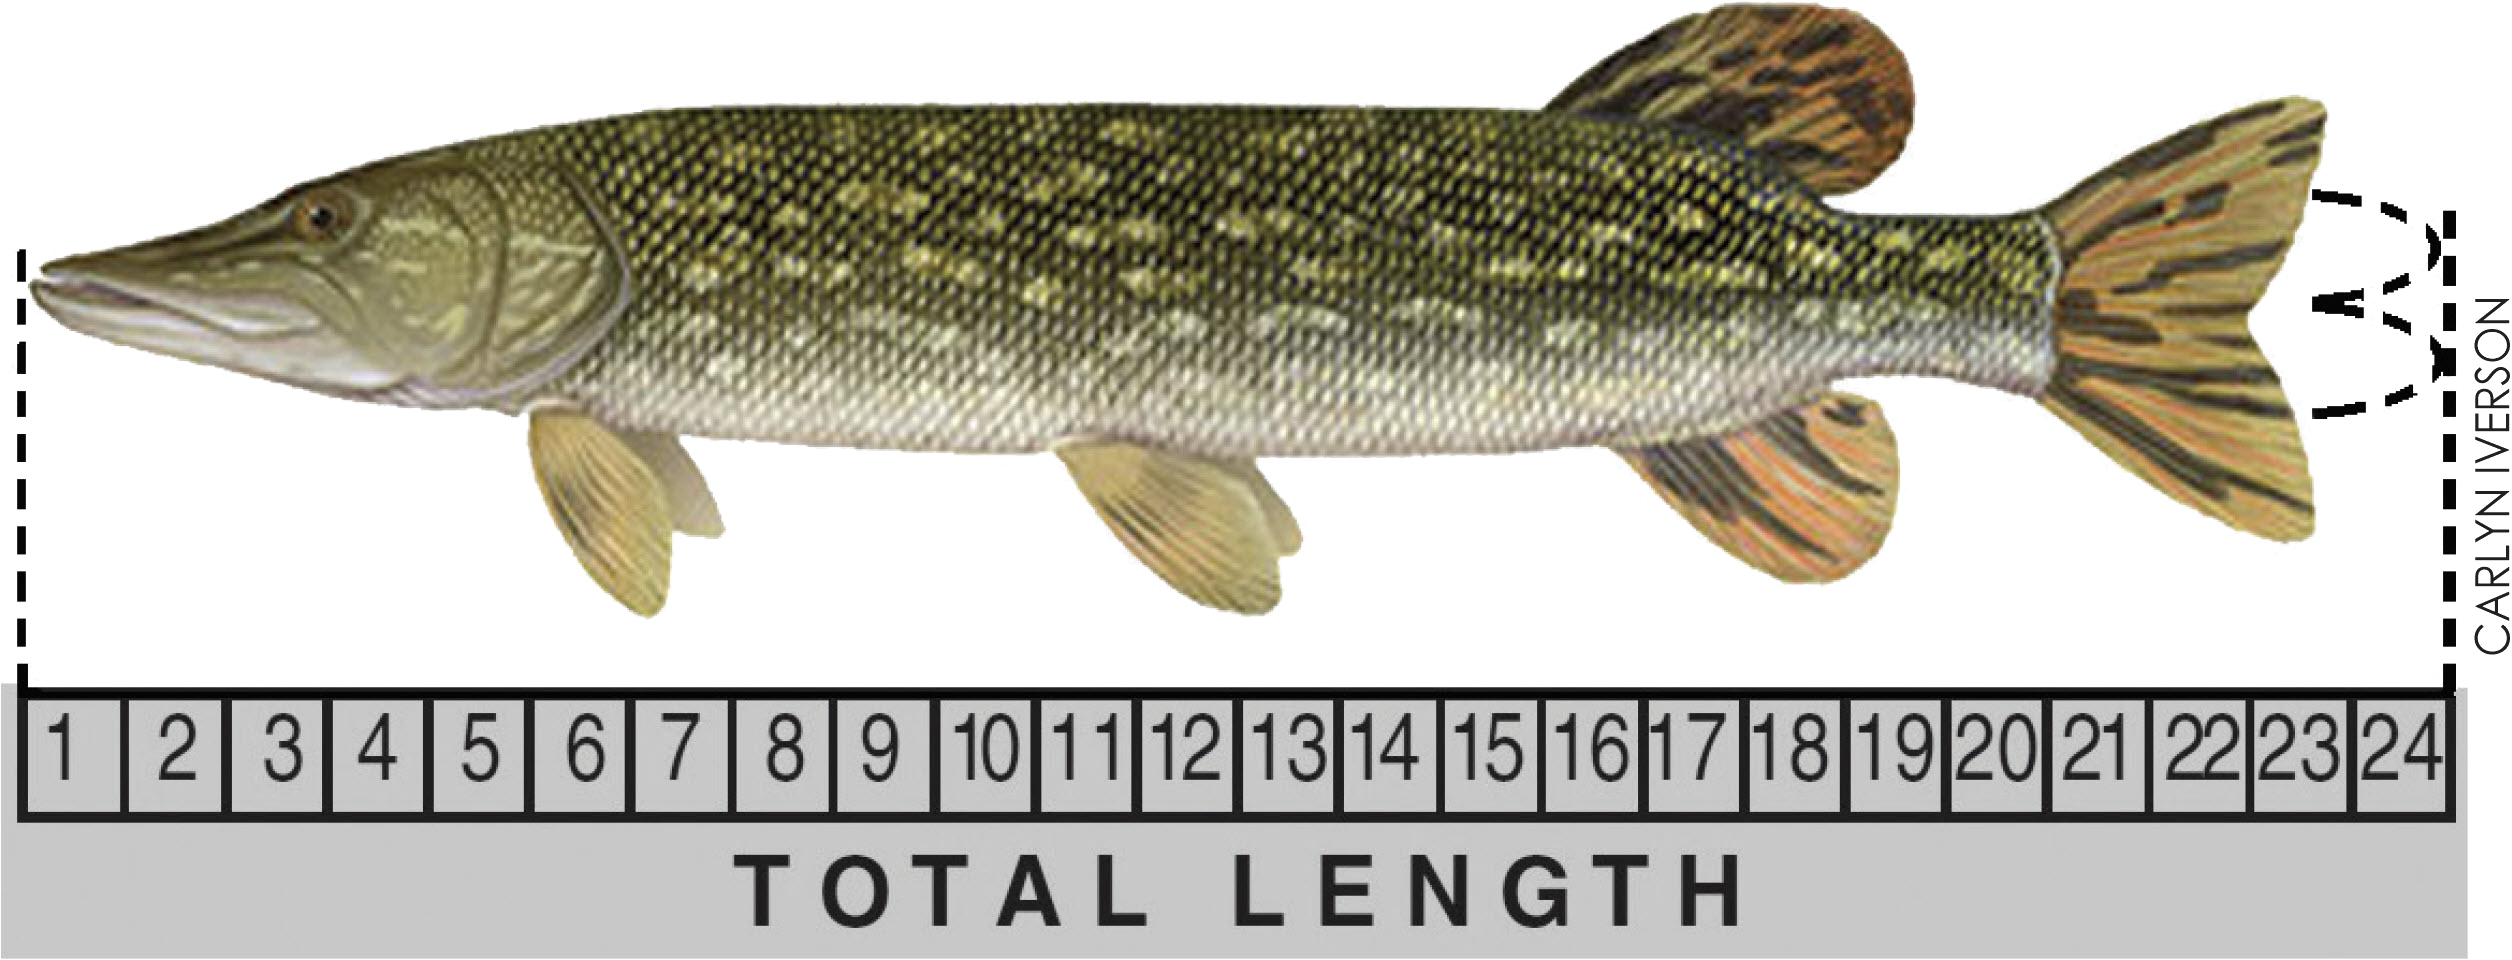 Northern pike above ruler